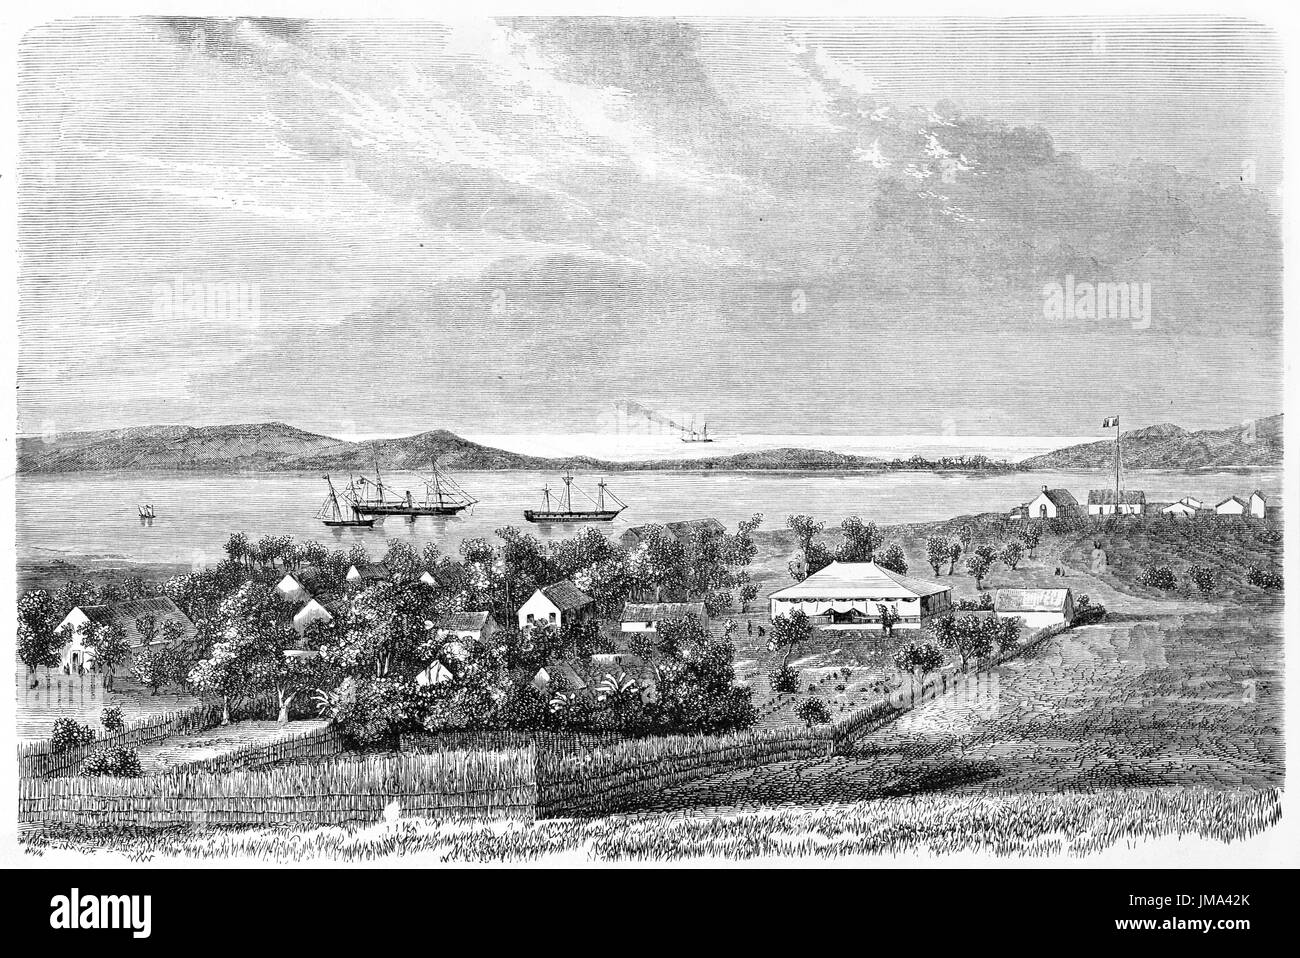 Vegetated flatland with farms and sea in background in Nouméa (formerly Port-de-France), New Caledonia. Art by De Berard, Le Tour du Monde, 1861 Stock Photo